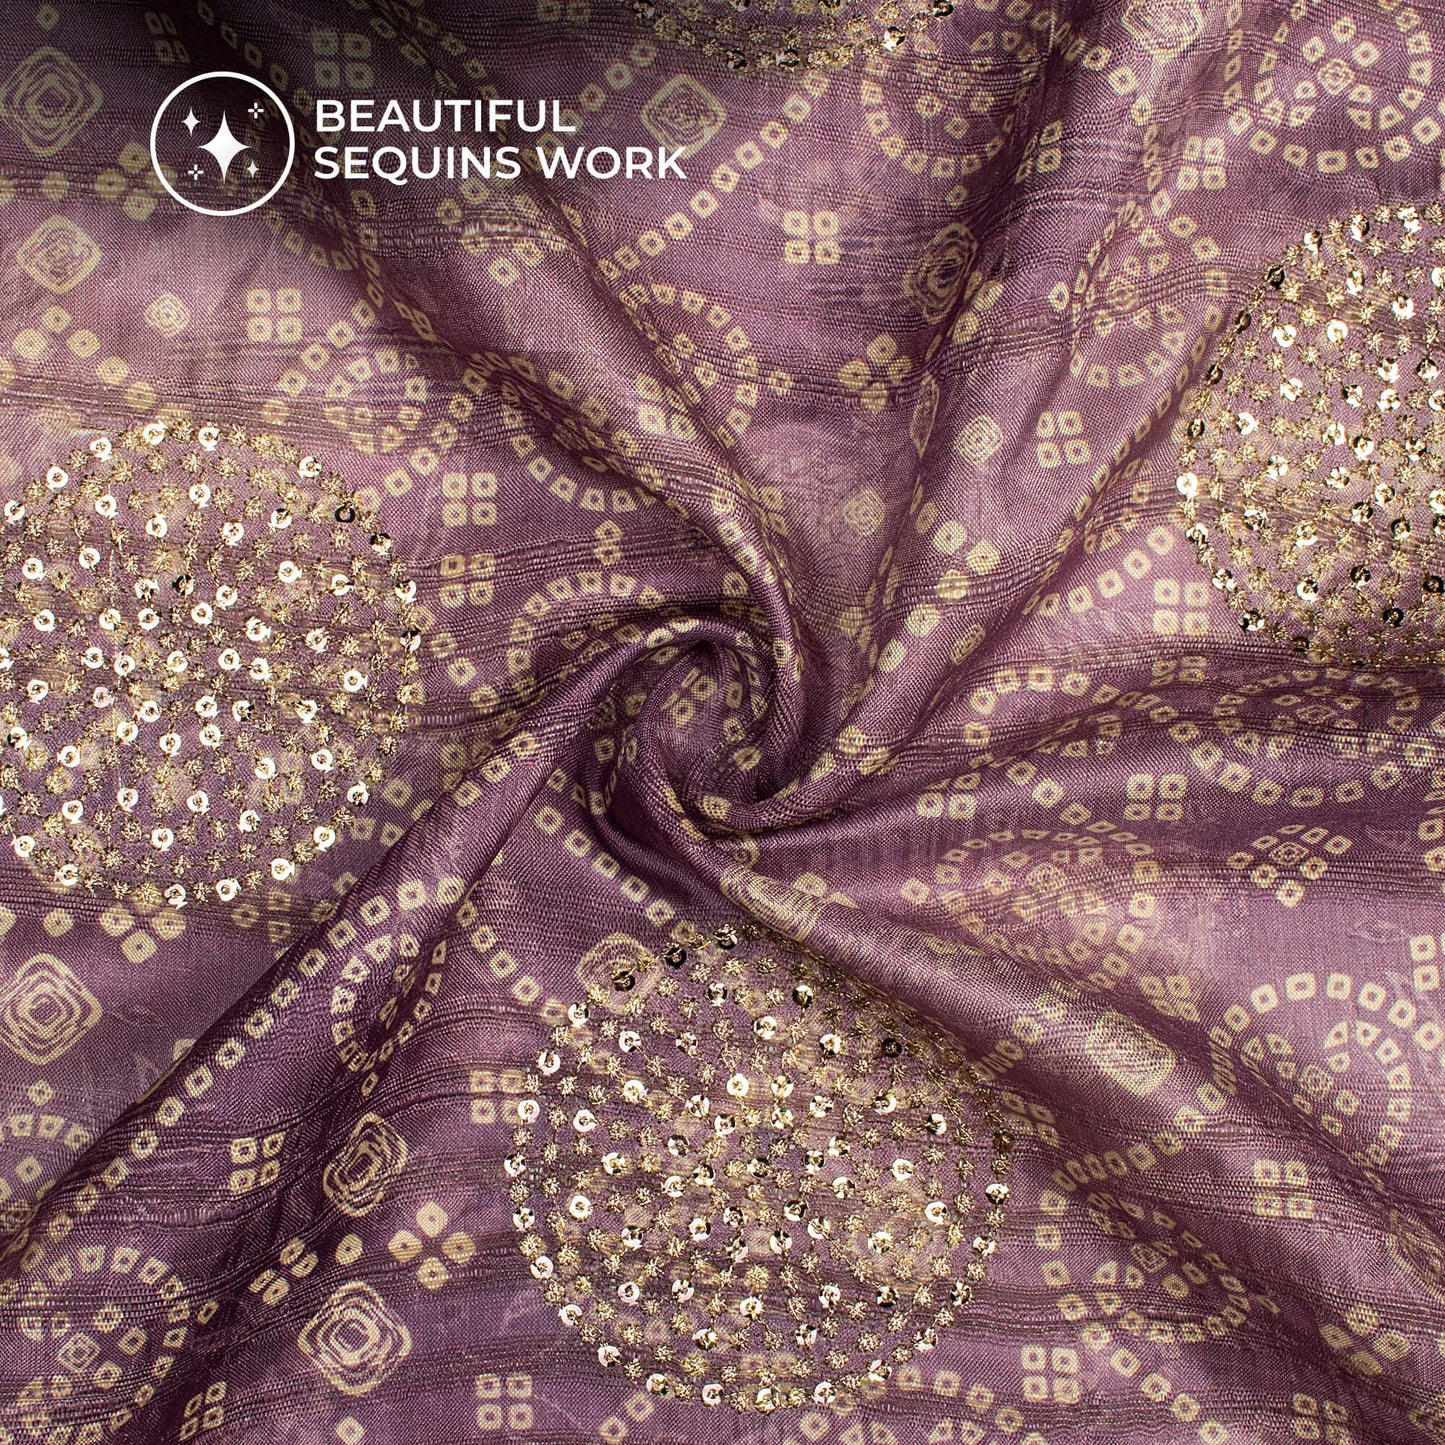 Heather Purple And White Bandhani Digital Print Butta Sequins Embroidery On Heritage Art Silk Fabric